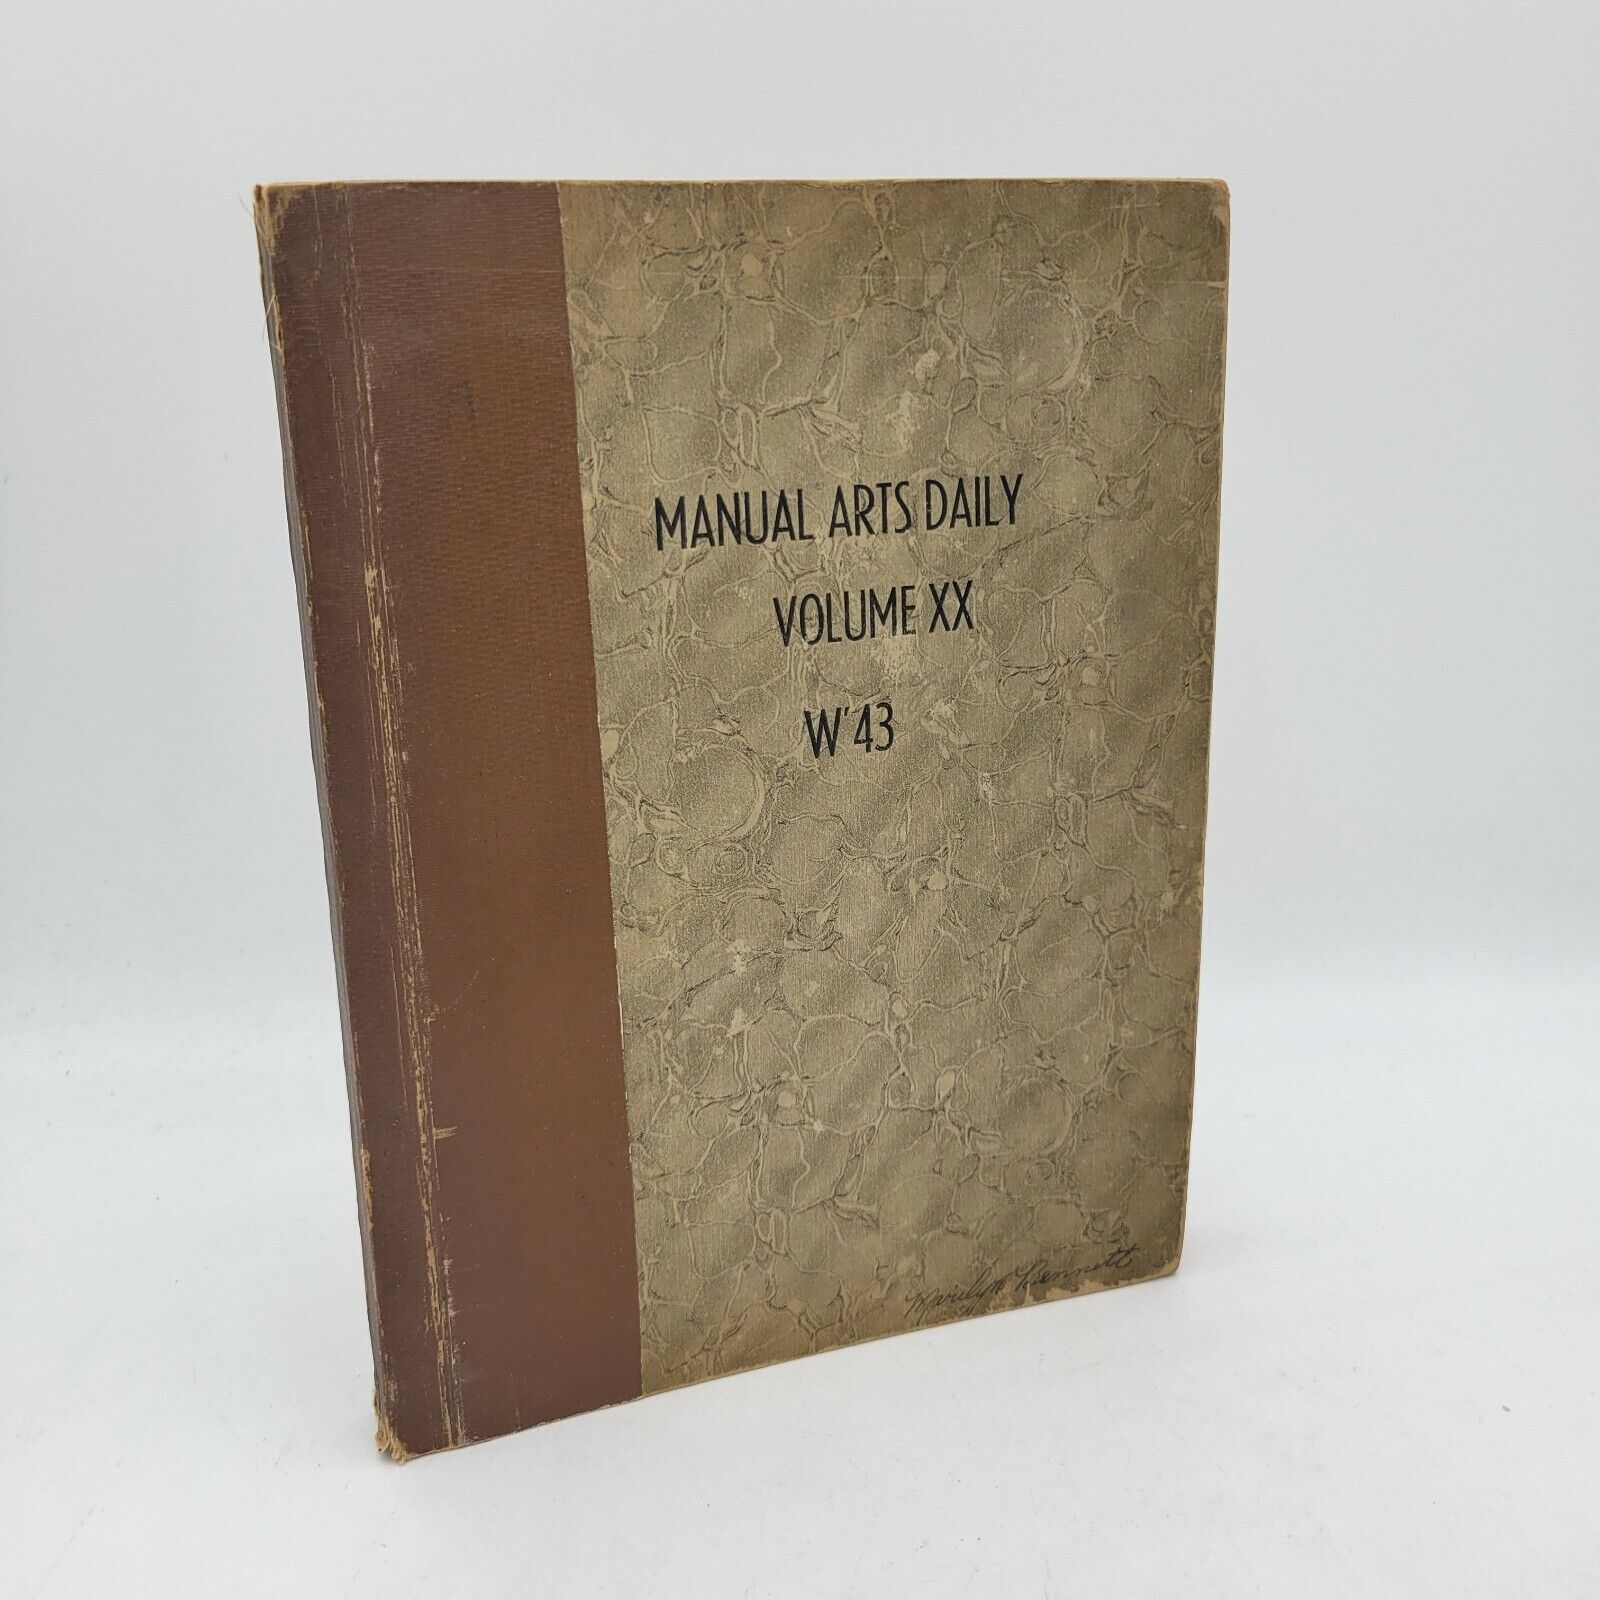 Manual Arts Daily Volume XX High School Bound Newspapers 1942-43 Los Angeles